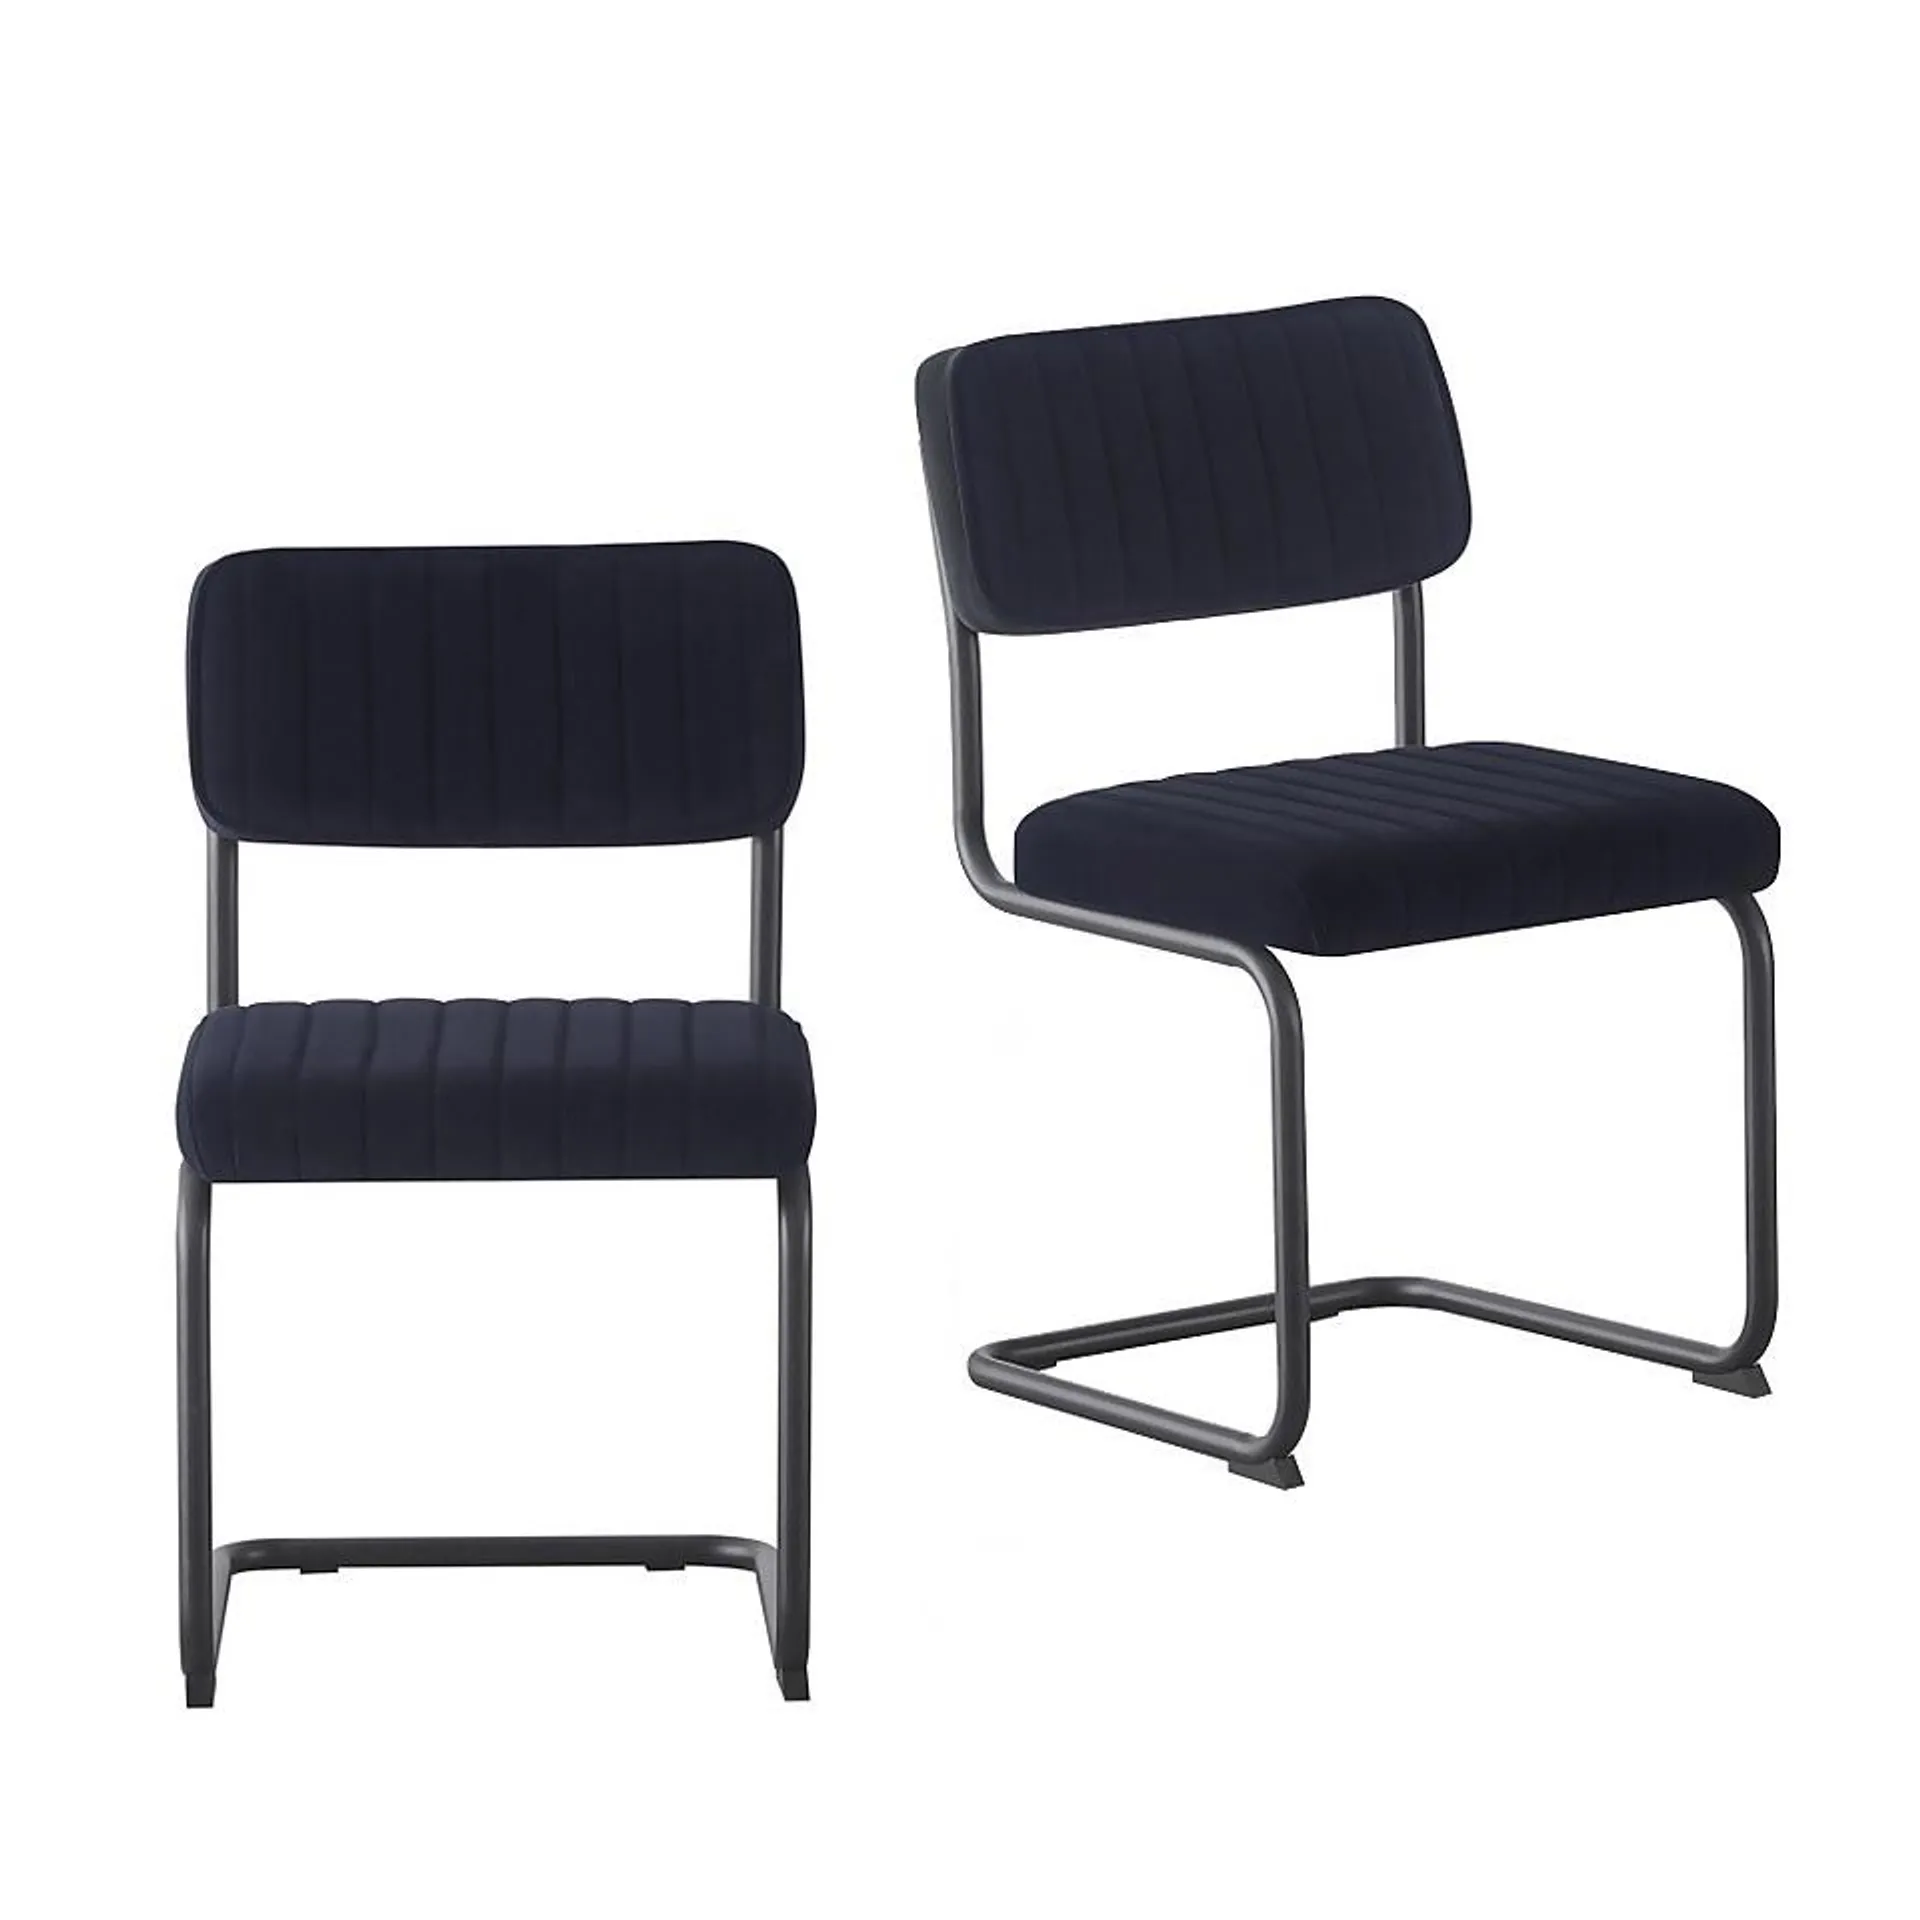 Layla Cantilever Dining Chair - Set of 2 - Midnight